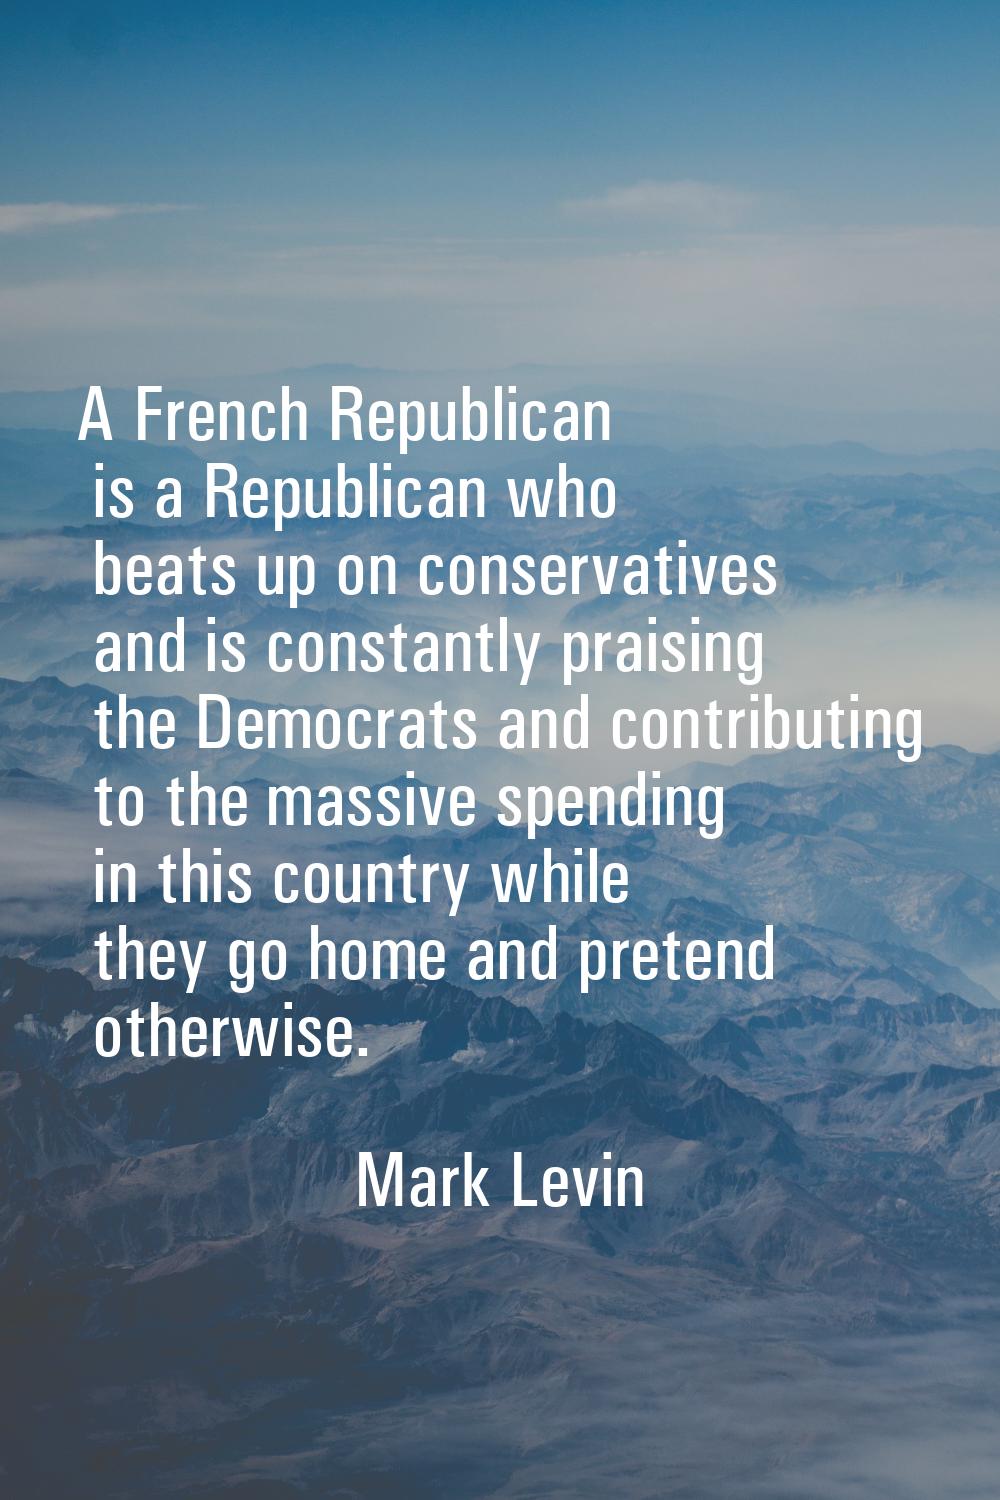 A French Republican is a Republican who beats up on conservatives and is constantly praising the De